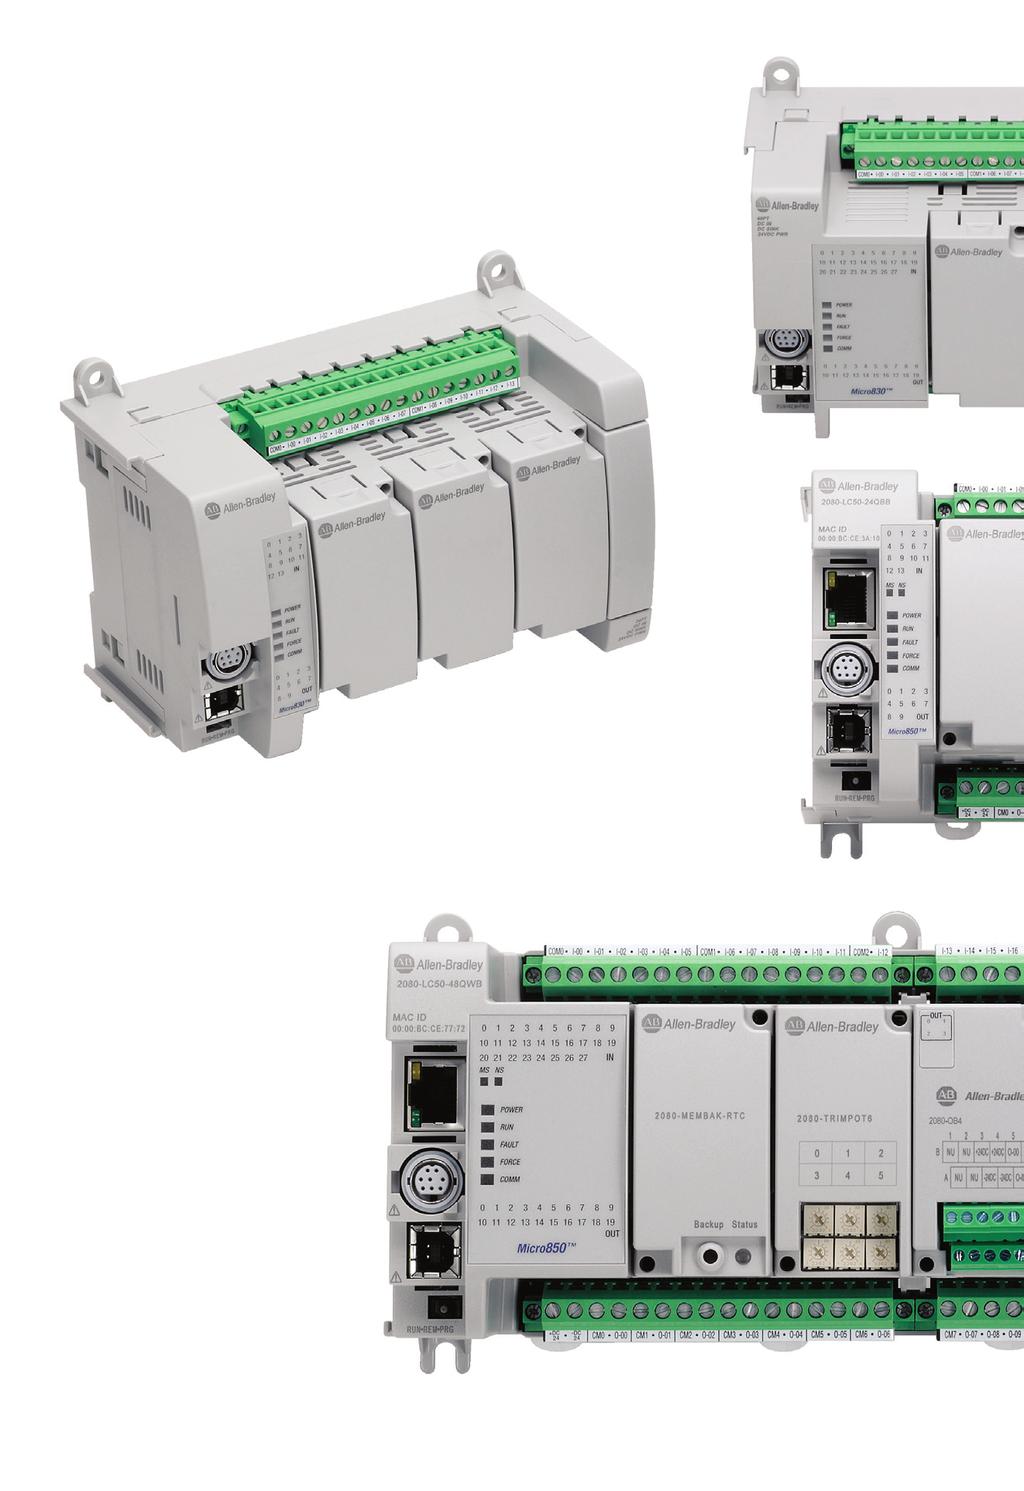 The Allen-Bradley Micro800 PLC family, together with the Connected Components Workbench software, sets a new global standard for convenience and ease of